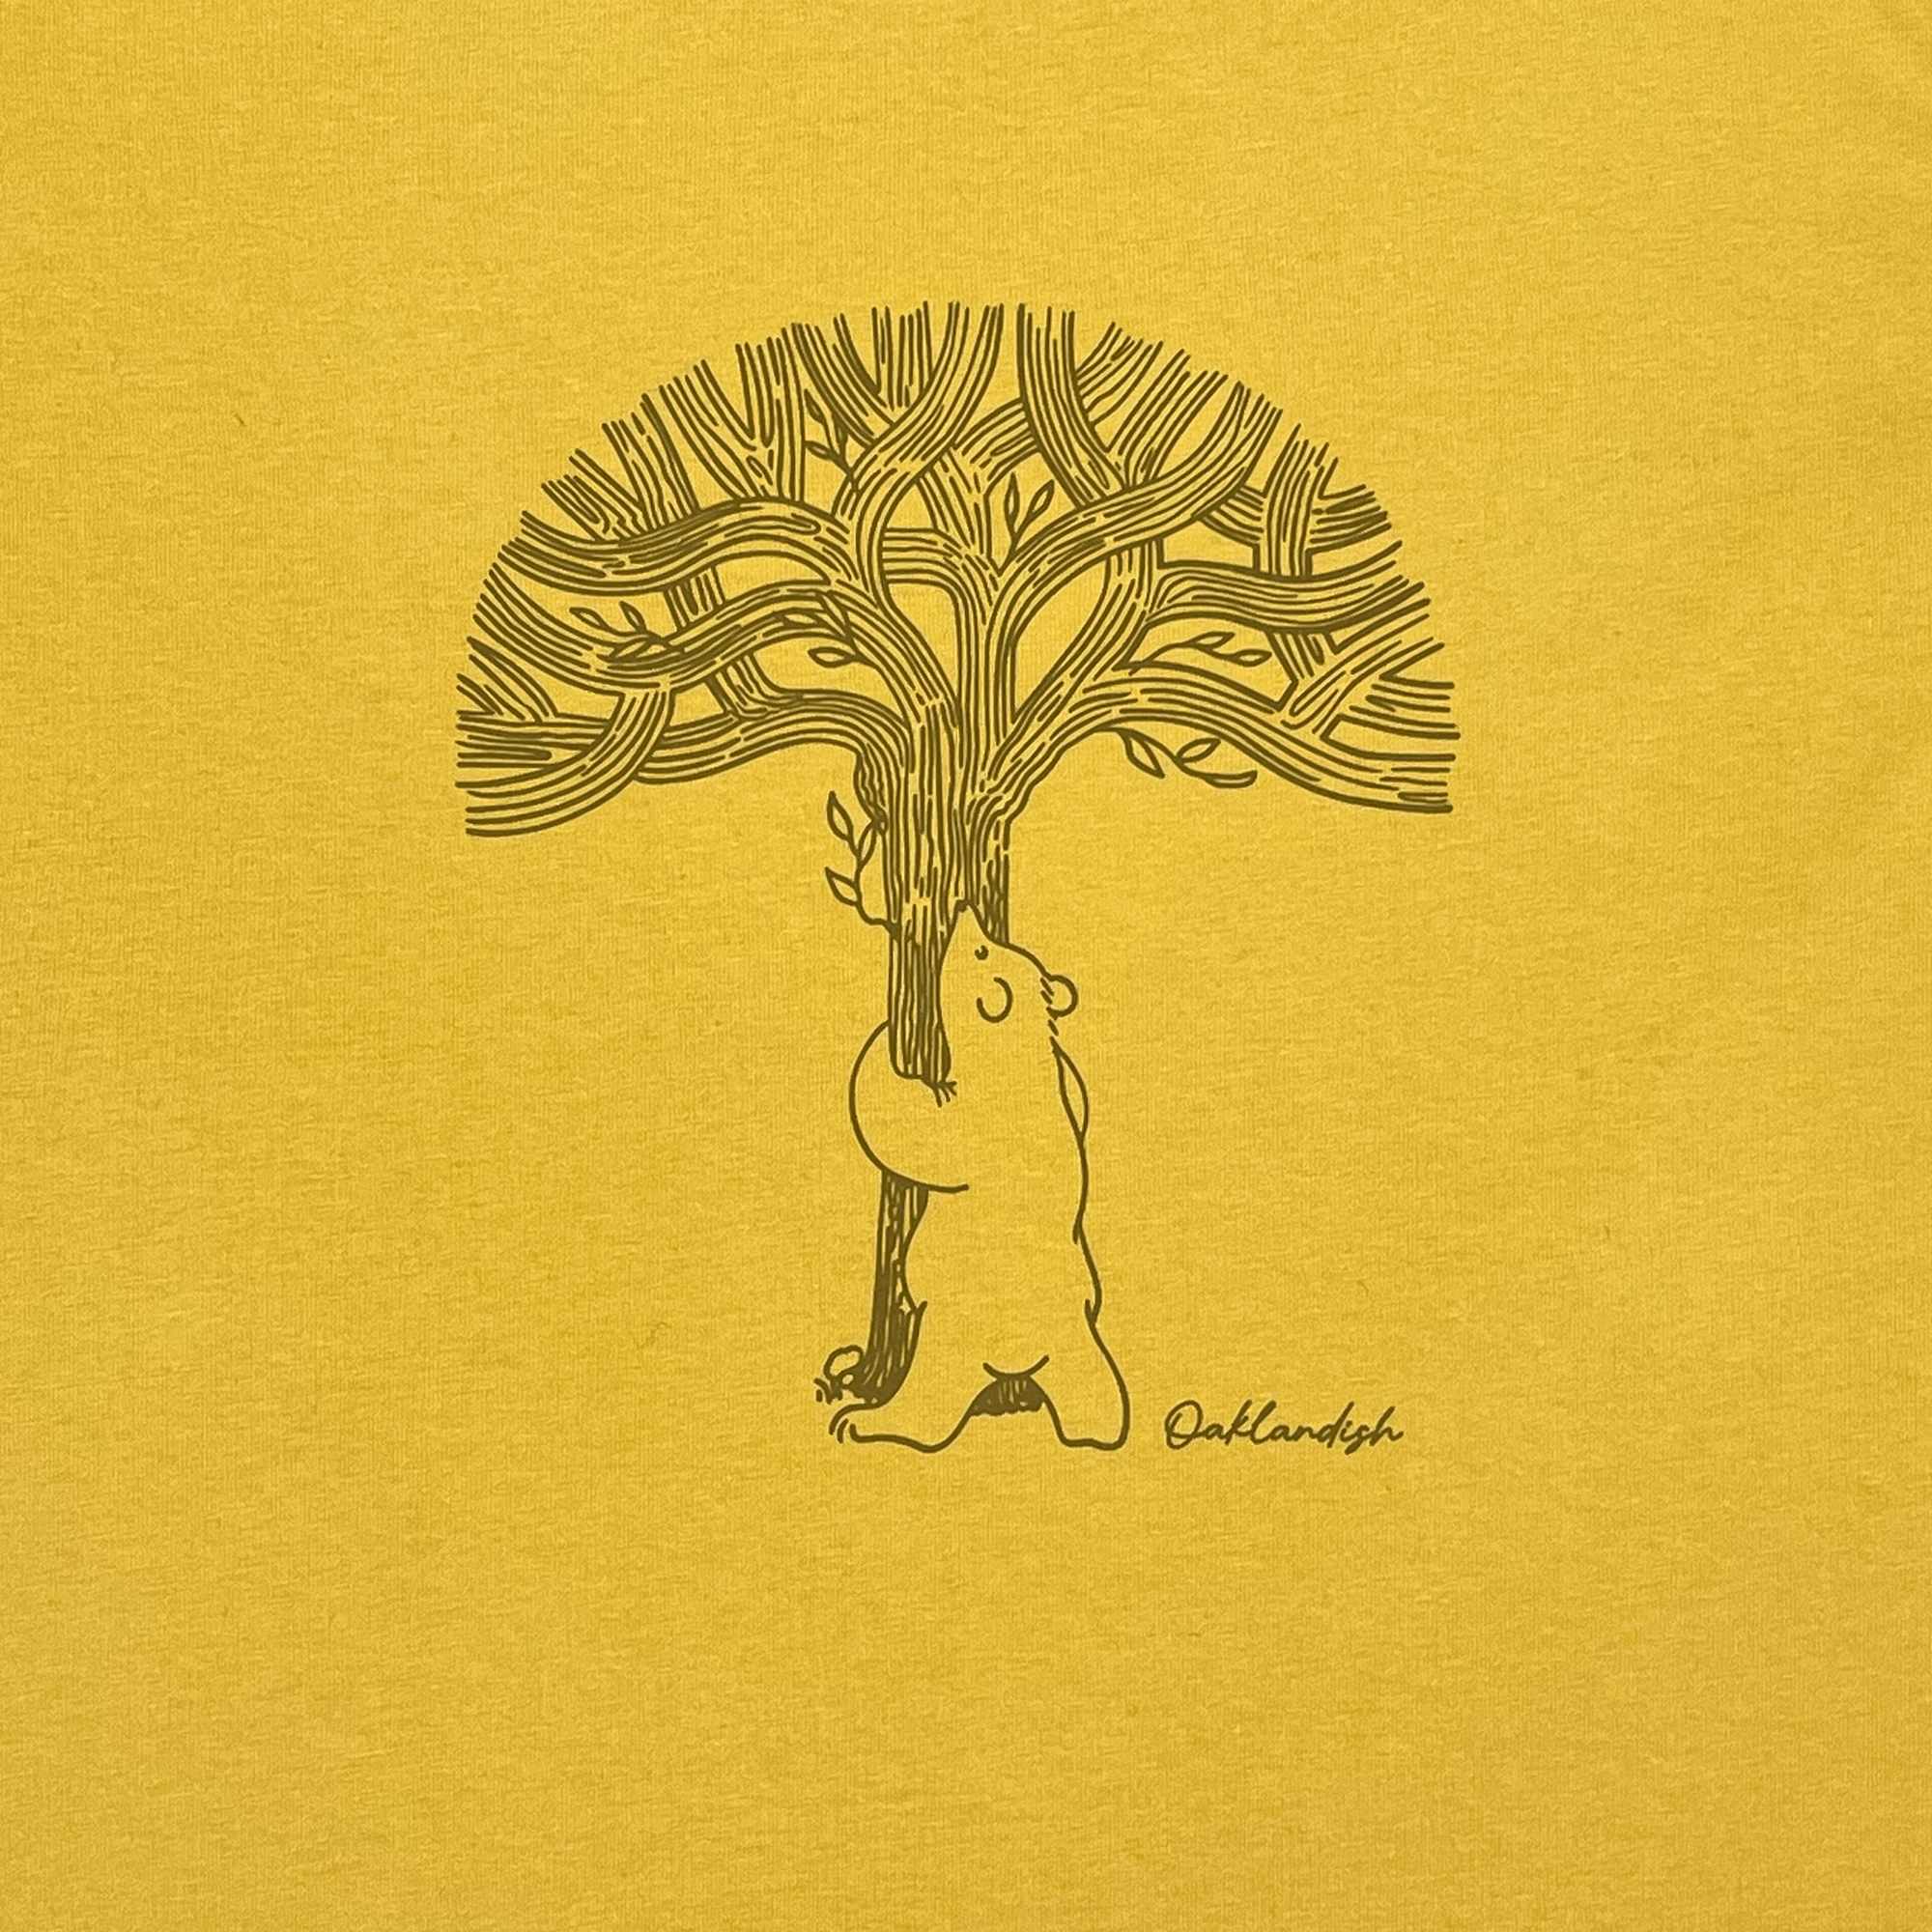 Close-up of line graphic featuring a bear hugging a tree representing Oaklandish with Oaklandish wordmark on mustard yellow women’s cut t-shirt.